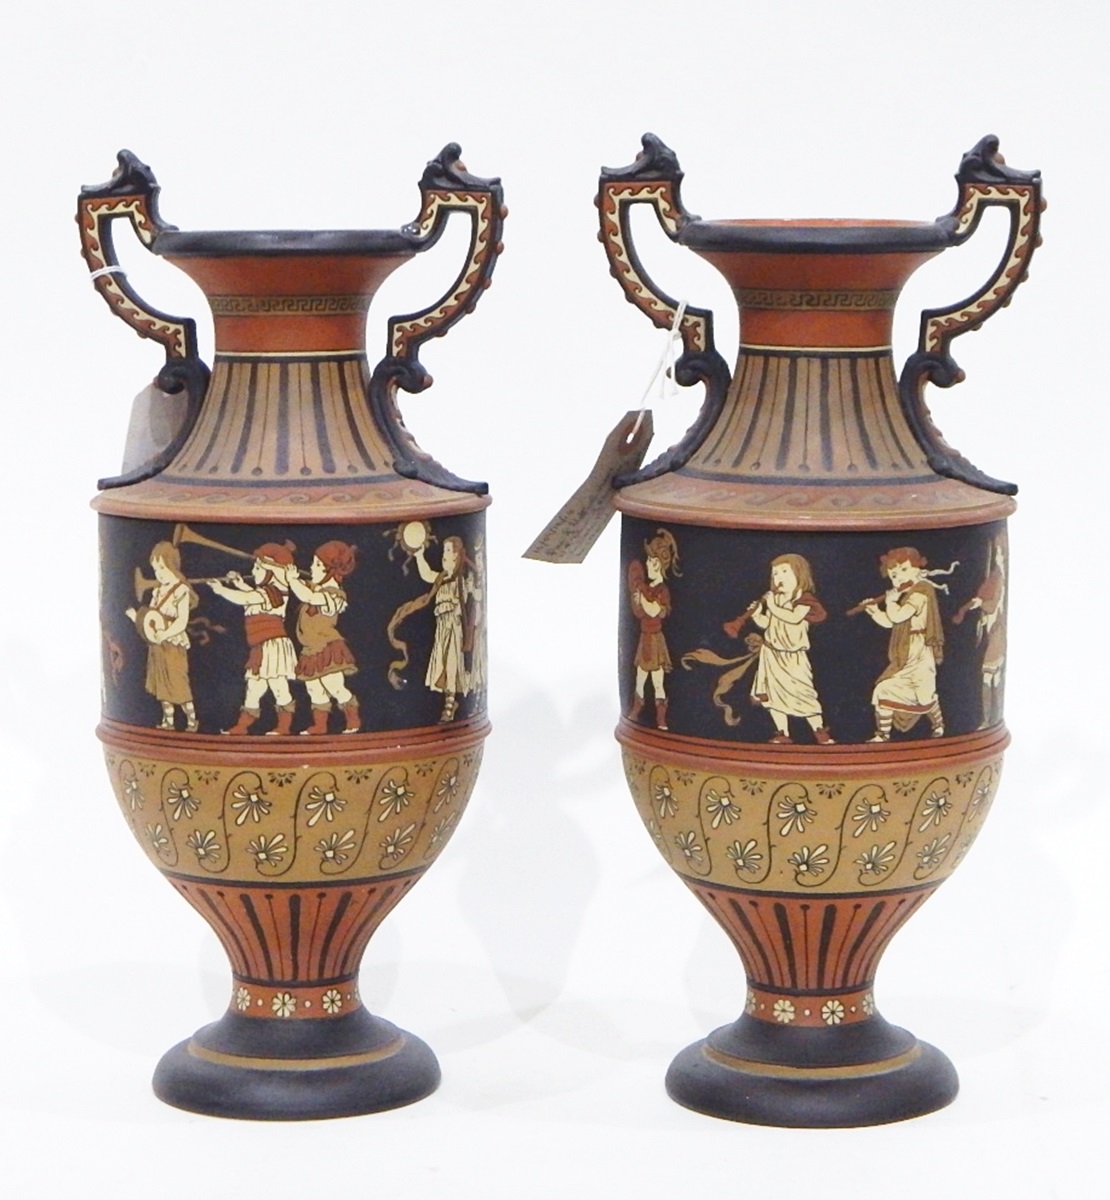 Pair of Mettlach Greek-style stoneware vases of two-handled baluster form,